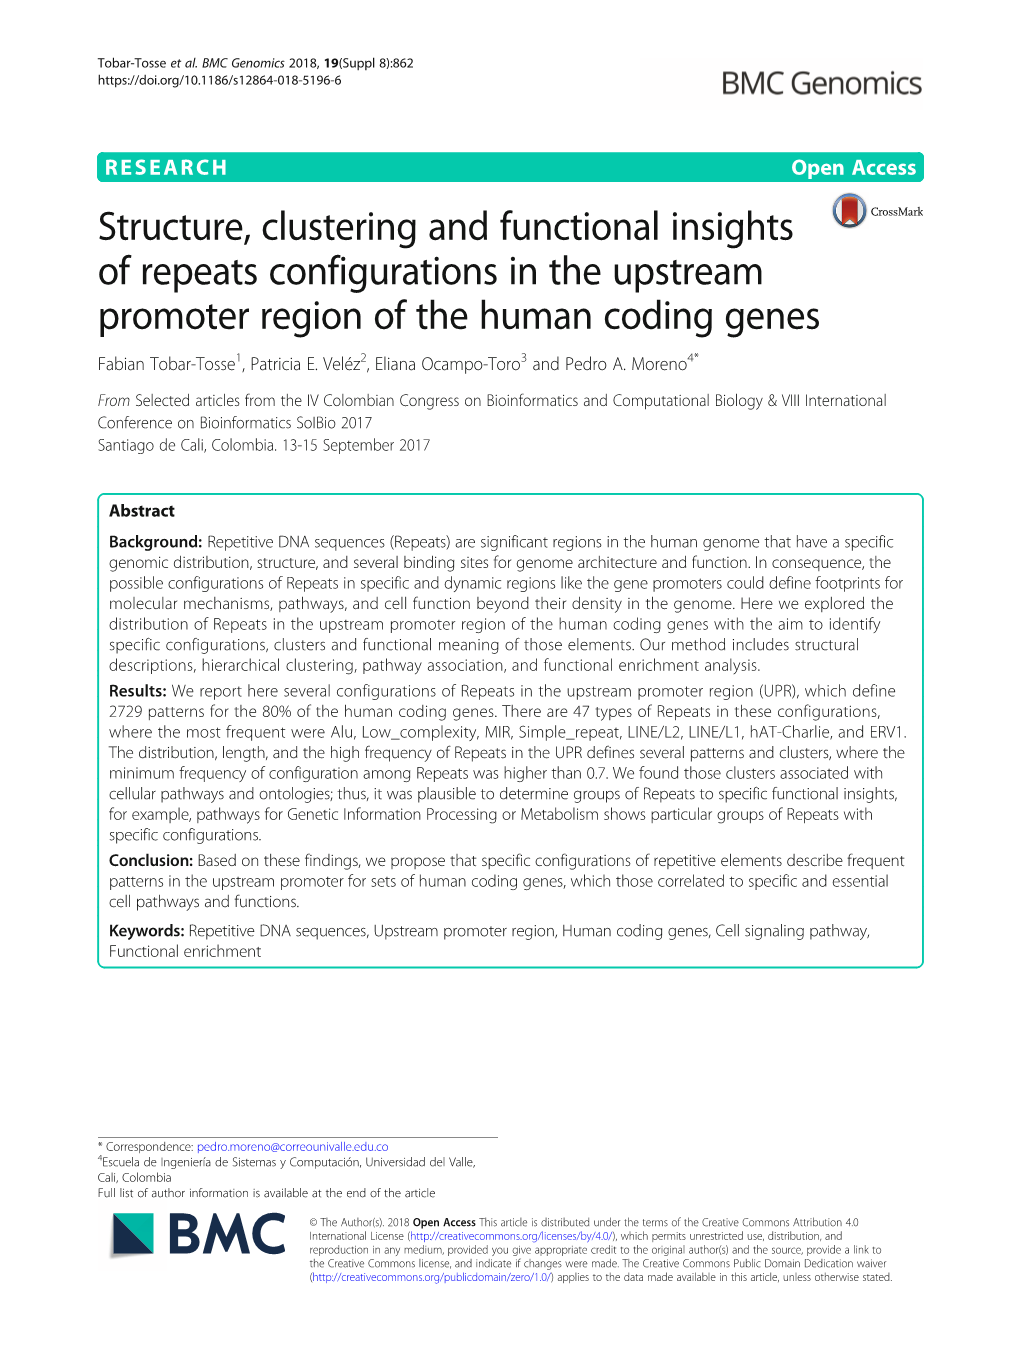 Structure, Clustering and Functional Insights of Repeats Configurations in the Upstream Promoter Region of the Human Coding Genes Fabian Tobar-Tosse1, Patricia E